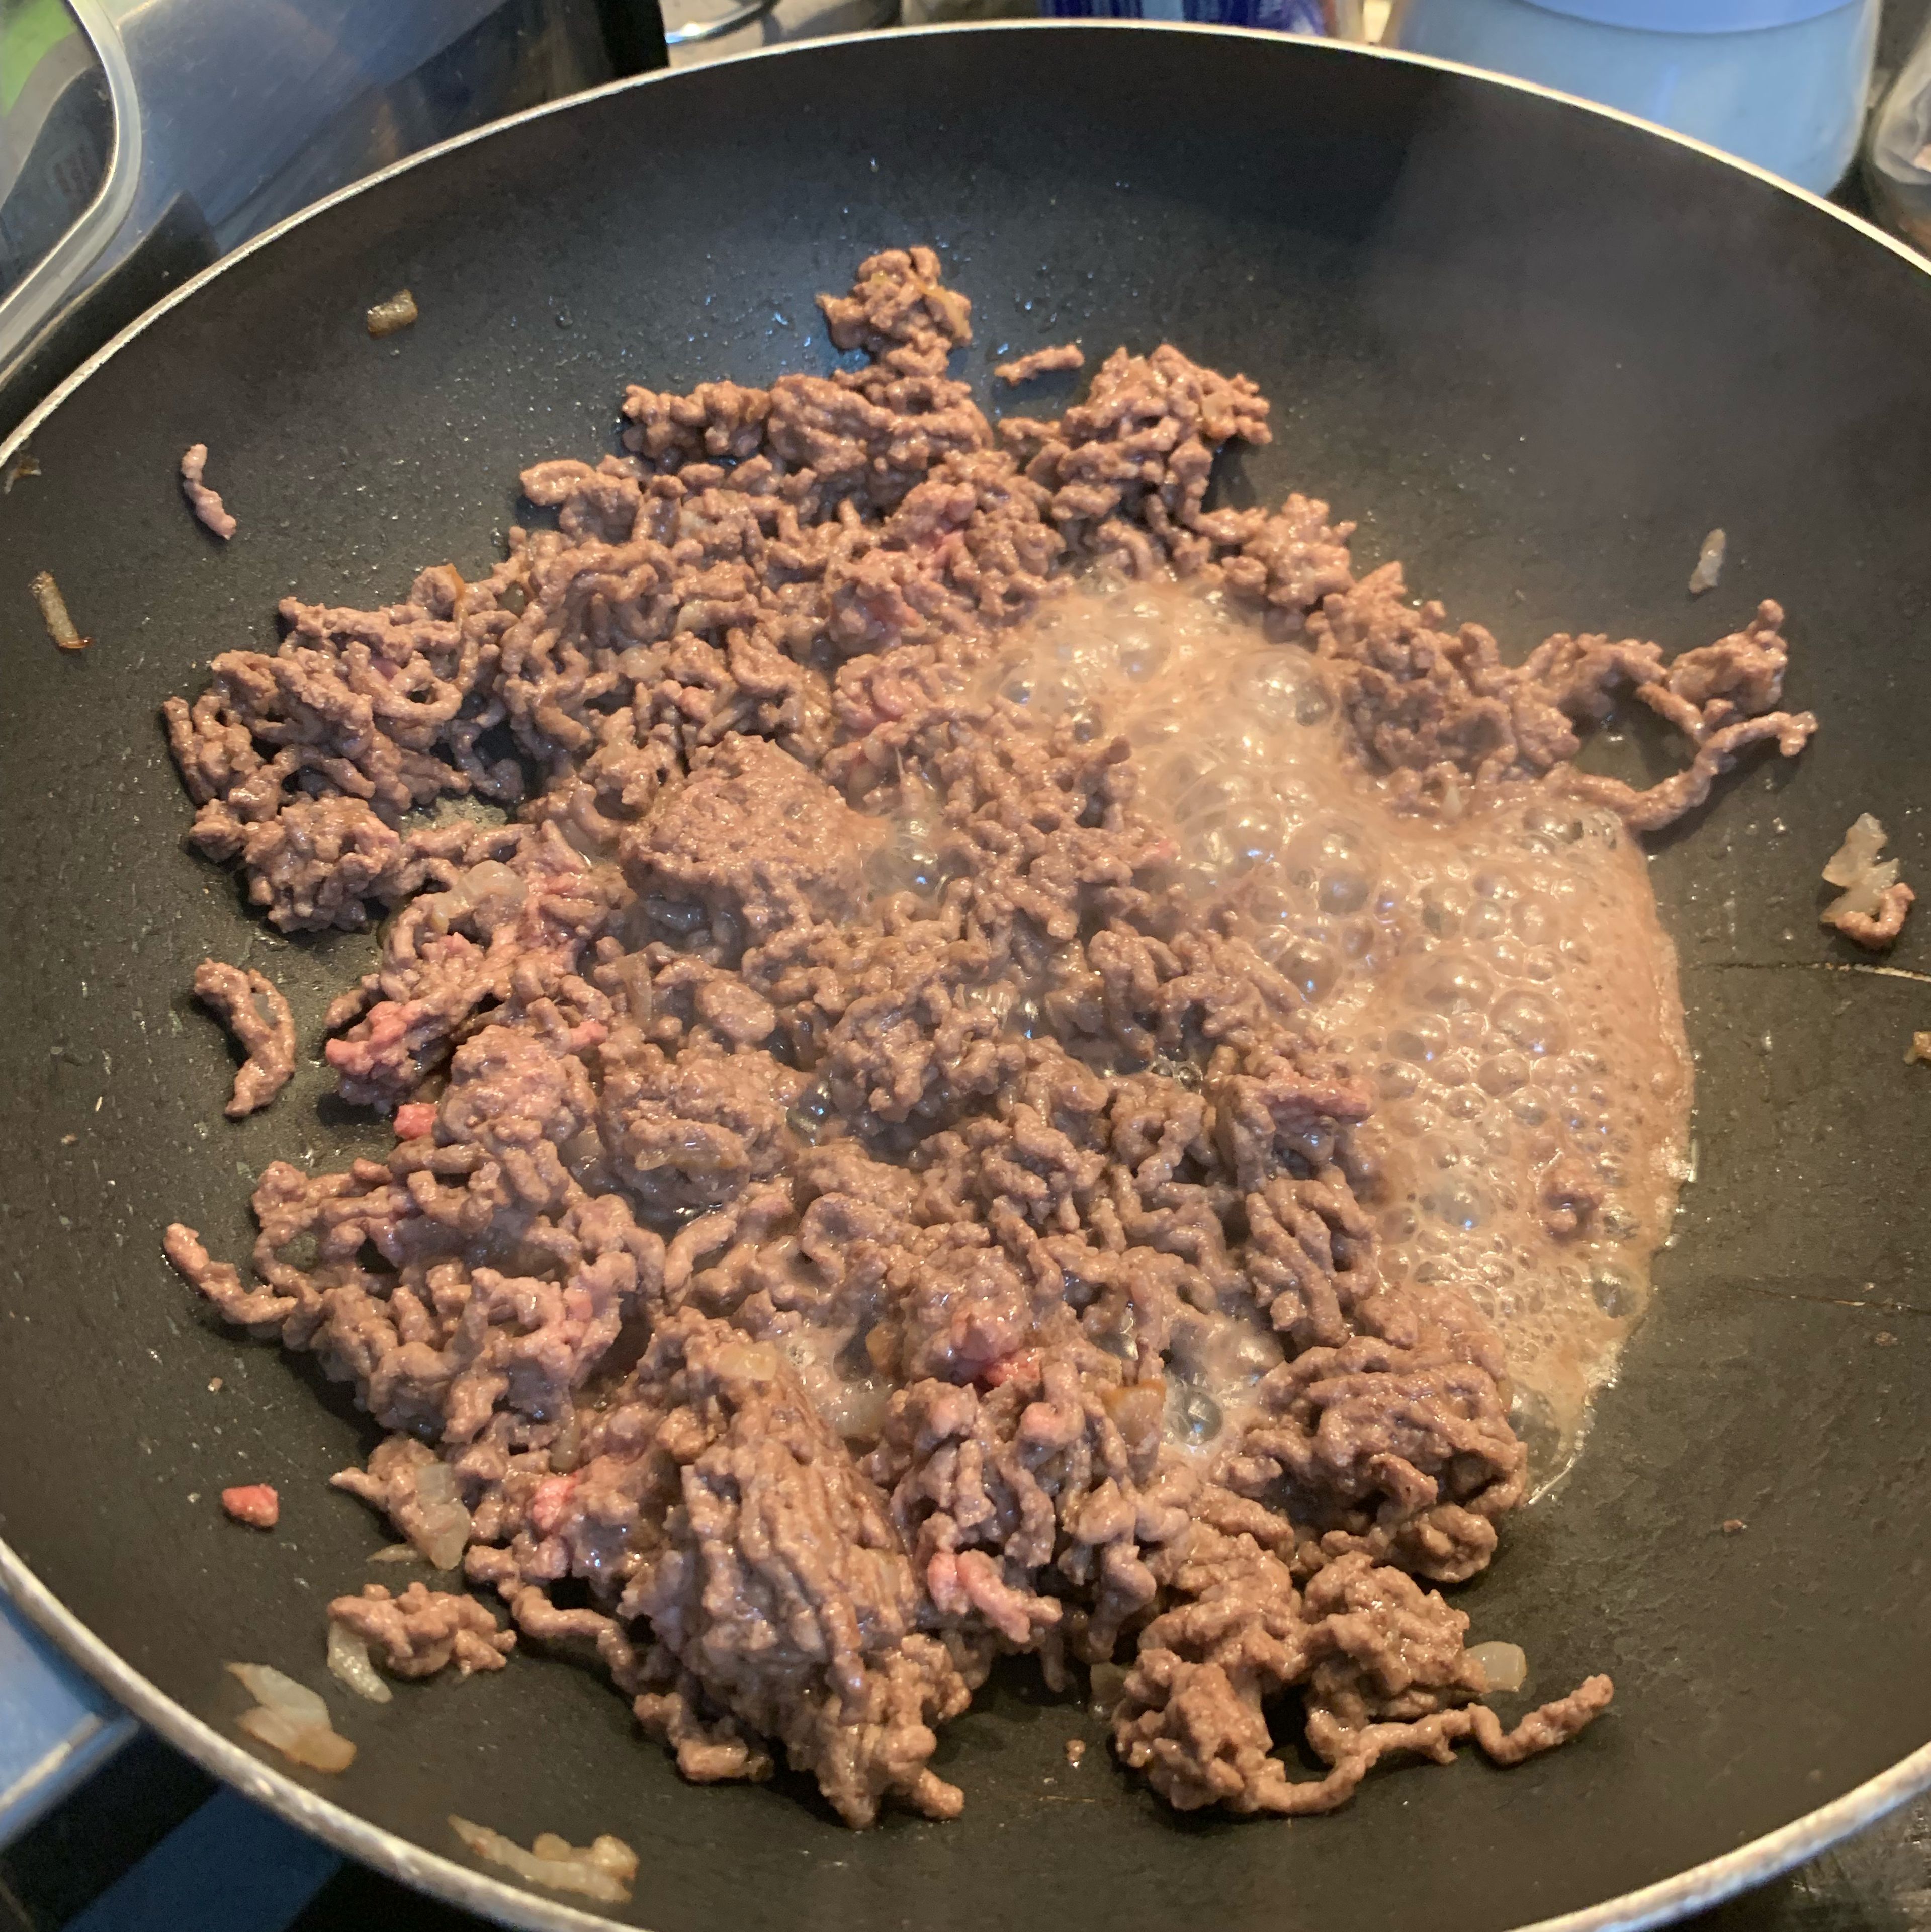 Throw the steak mince in the frying pan with the onion previously cooked. Cook till all nice and brown and no raw bits are showing. Add a stock cube mixed with 100ml of water (either a chicken or beef cube - both do a good job in making the meat flavours come out more and cook better).